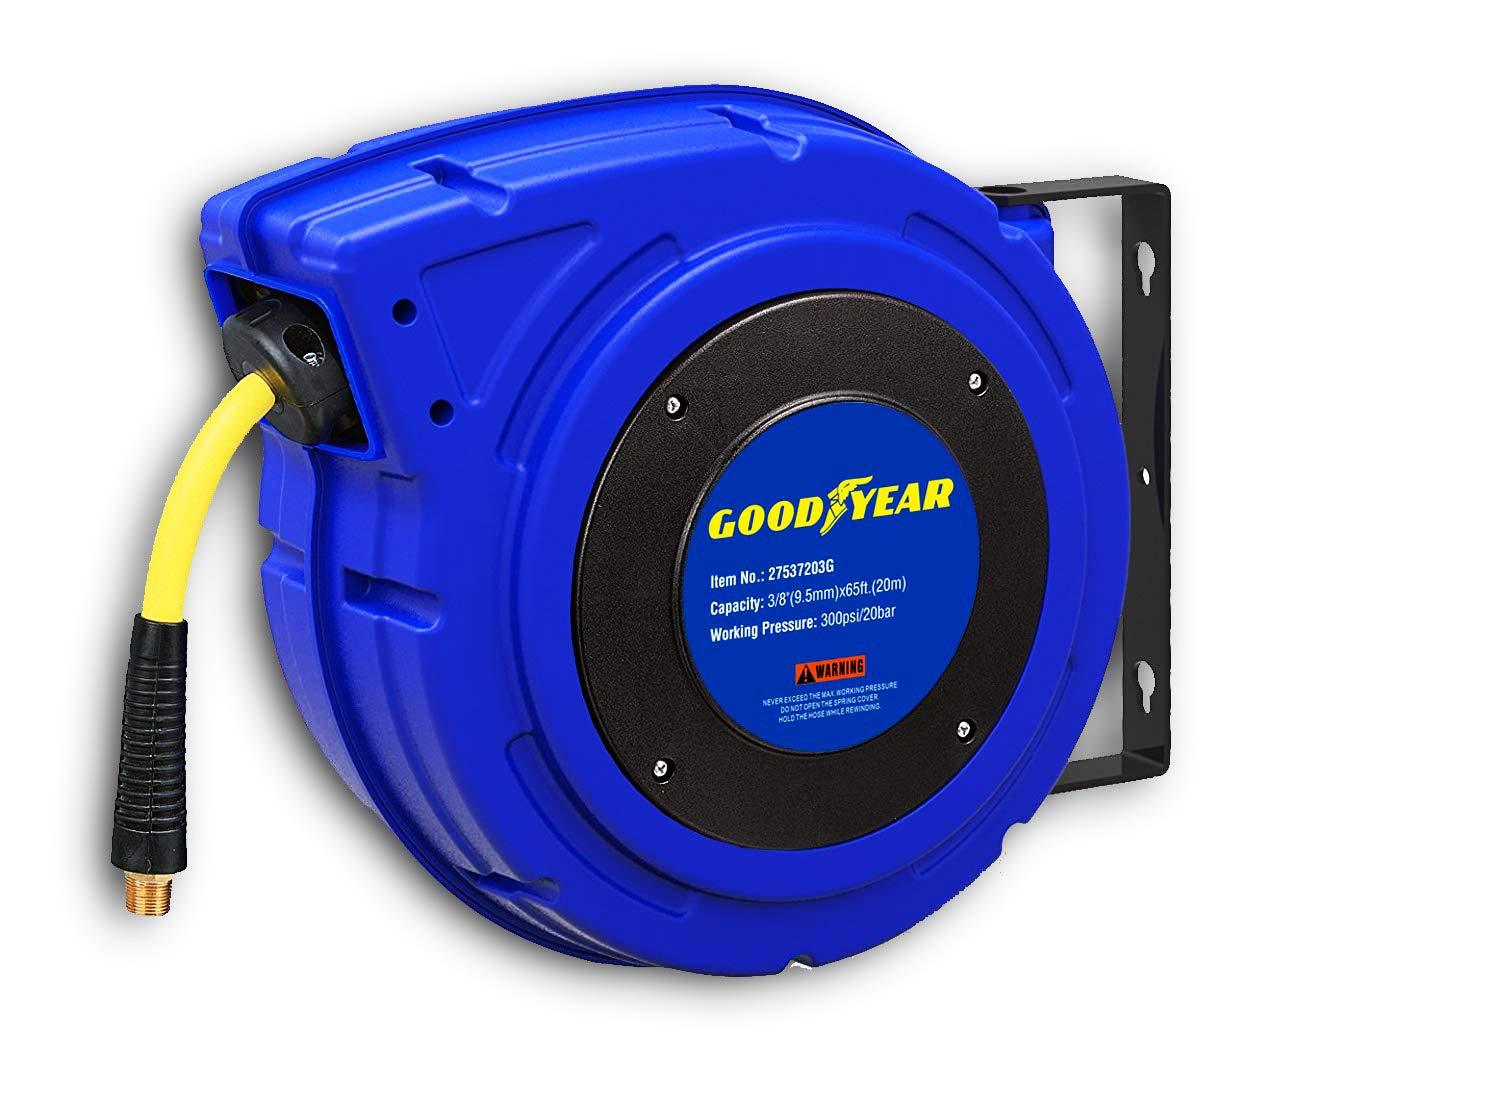 What Is A Retractable Air Hose Reel & Benefits of Using One?